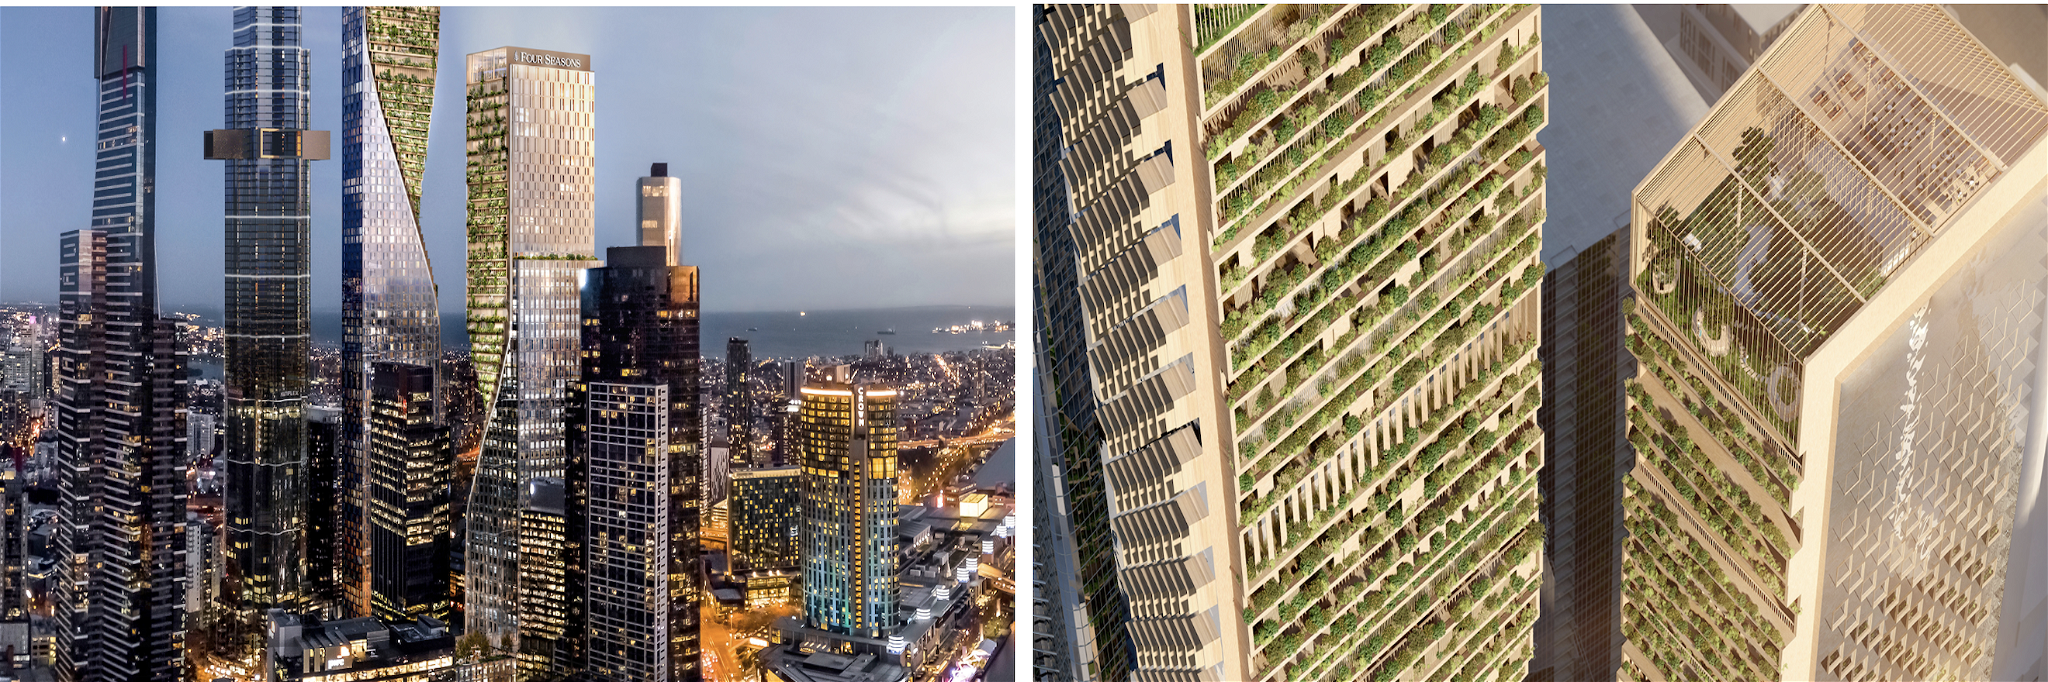 The new Four Seasons Hotel Melbourne will be in Australia's tallest building